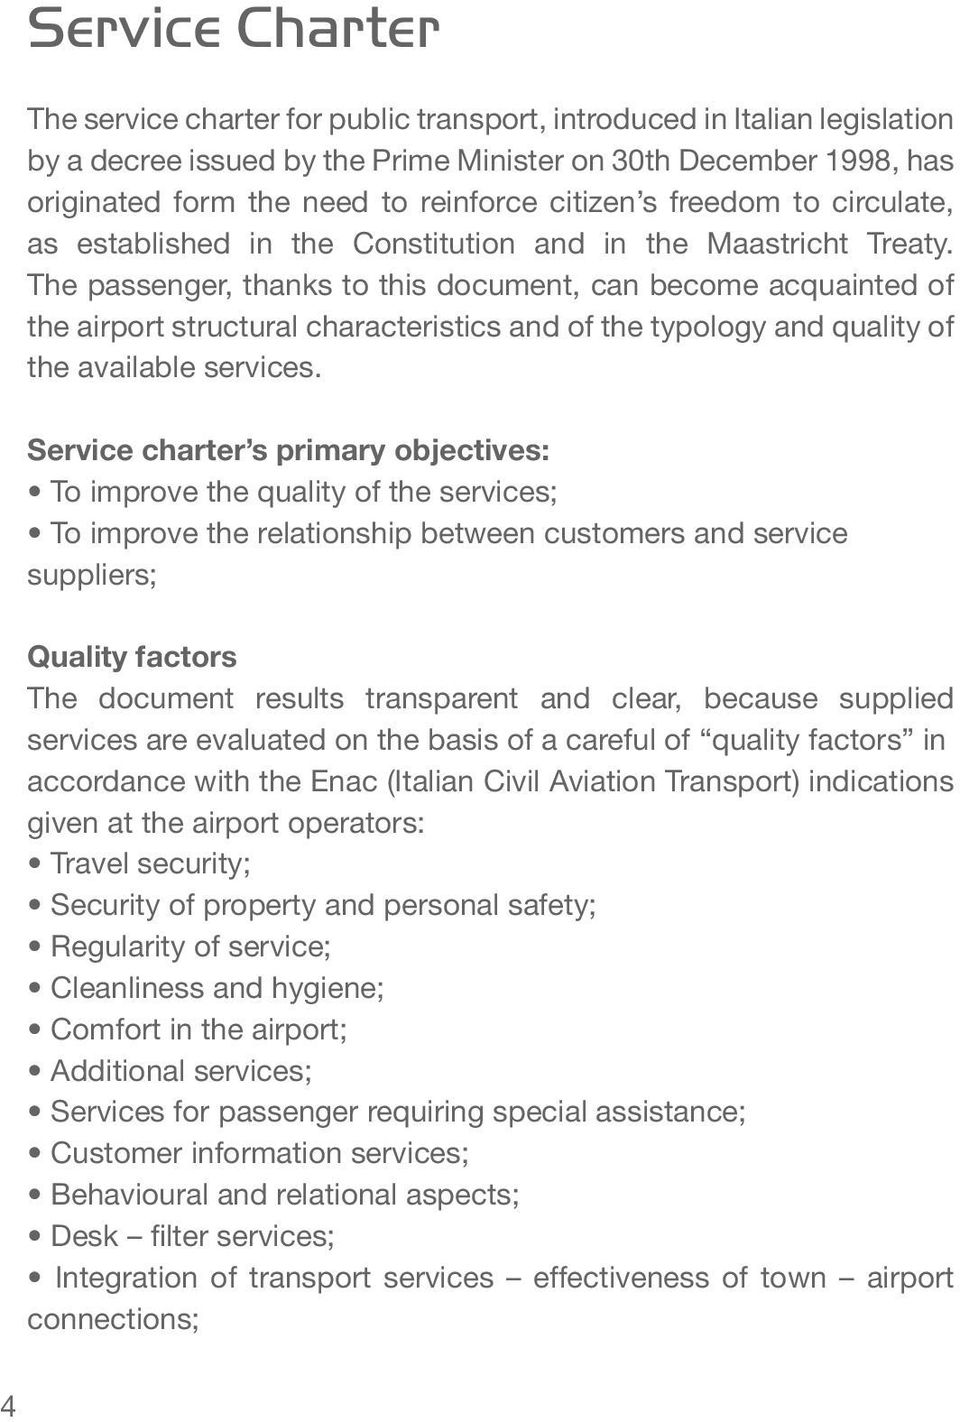 The passenger, thanks to this document, can become acquainted of the airport structural characteristics and of the typology and quality of the available services.